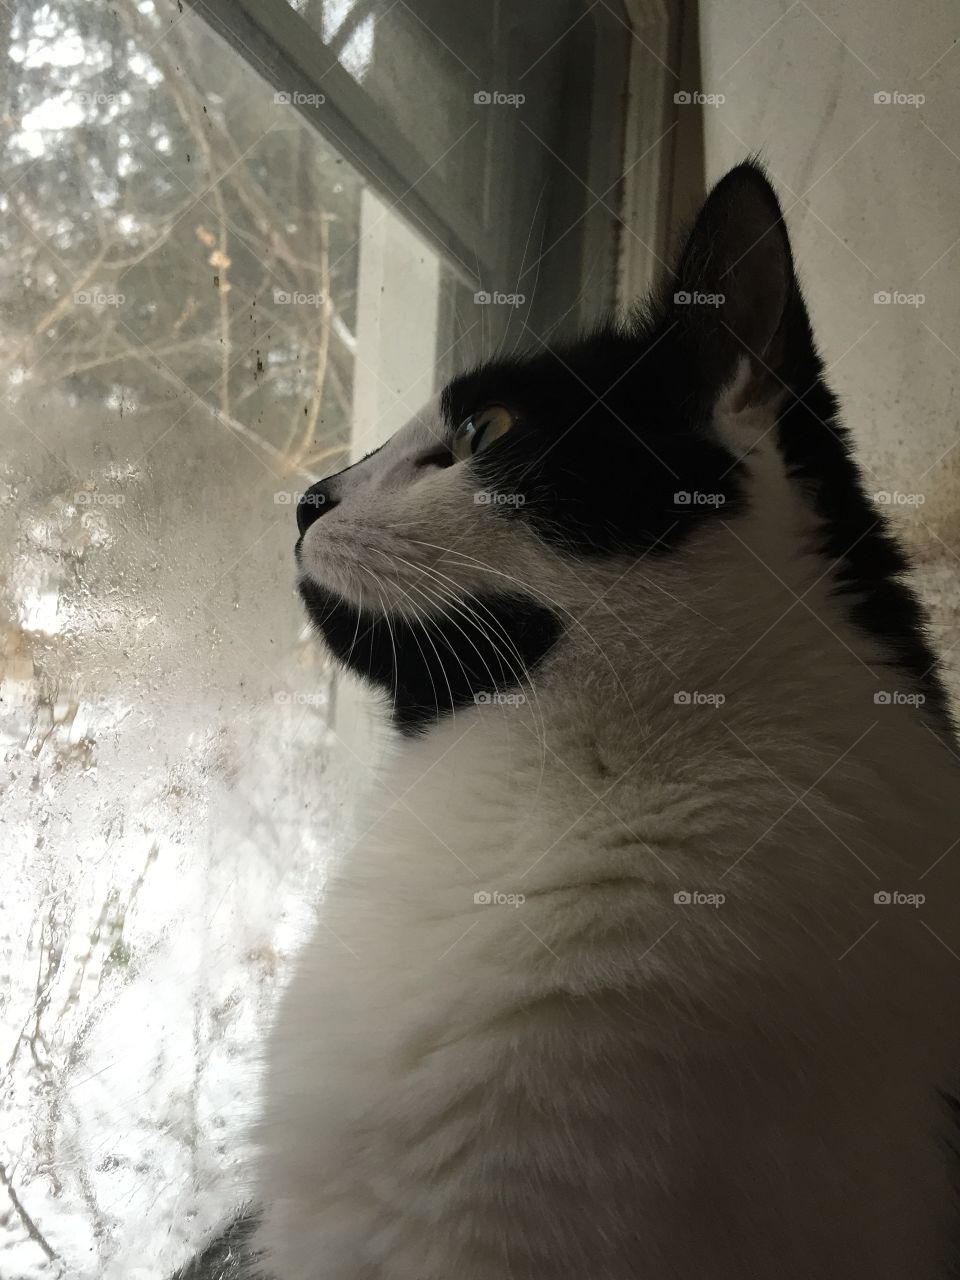 Black and white cat looking out window